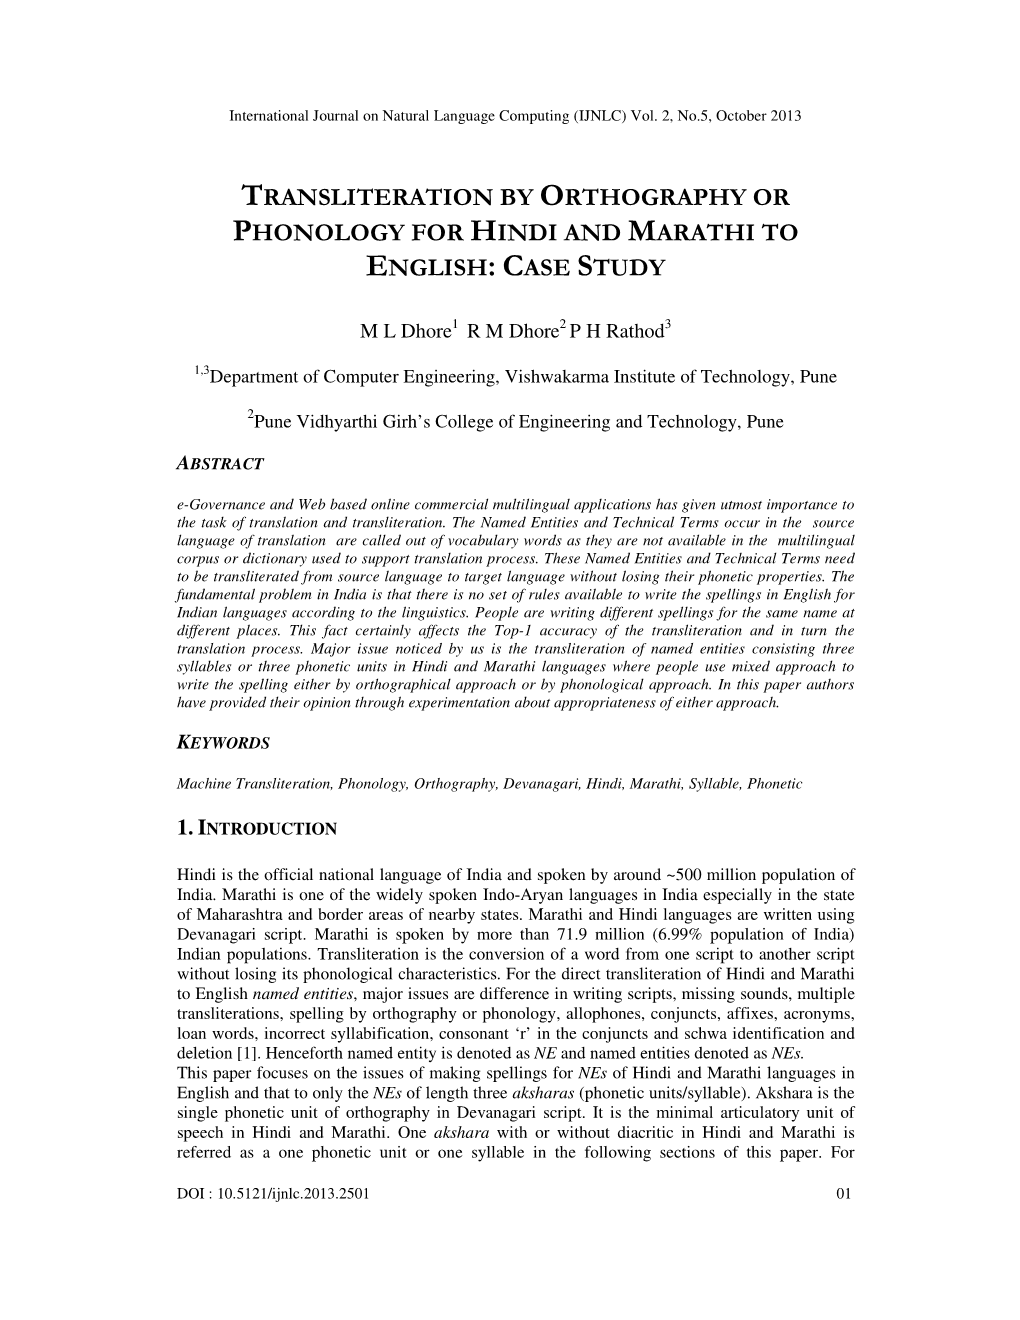 Transliteration by Orthography Or Phonology for Hindi and Marathi to English : Case Study